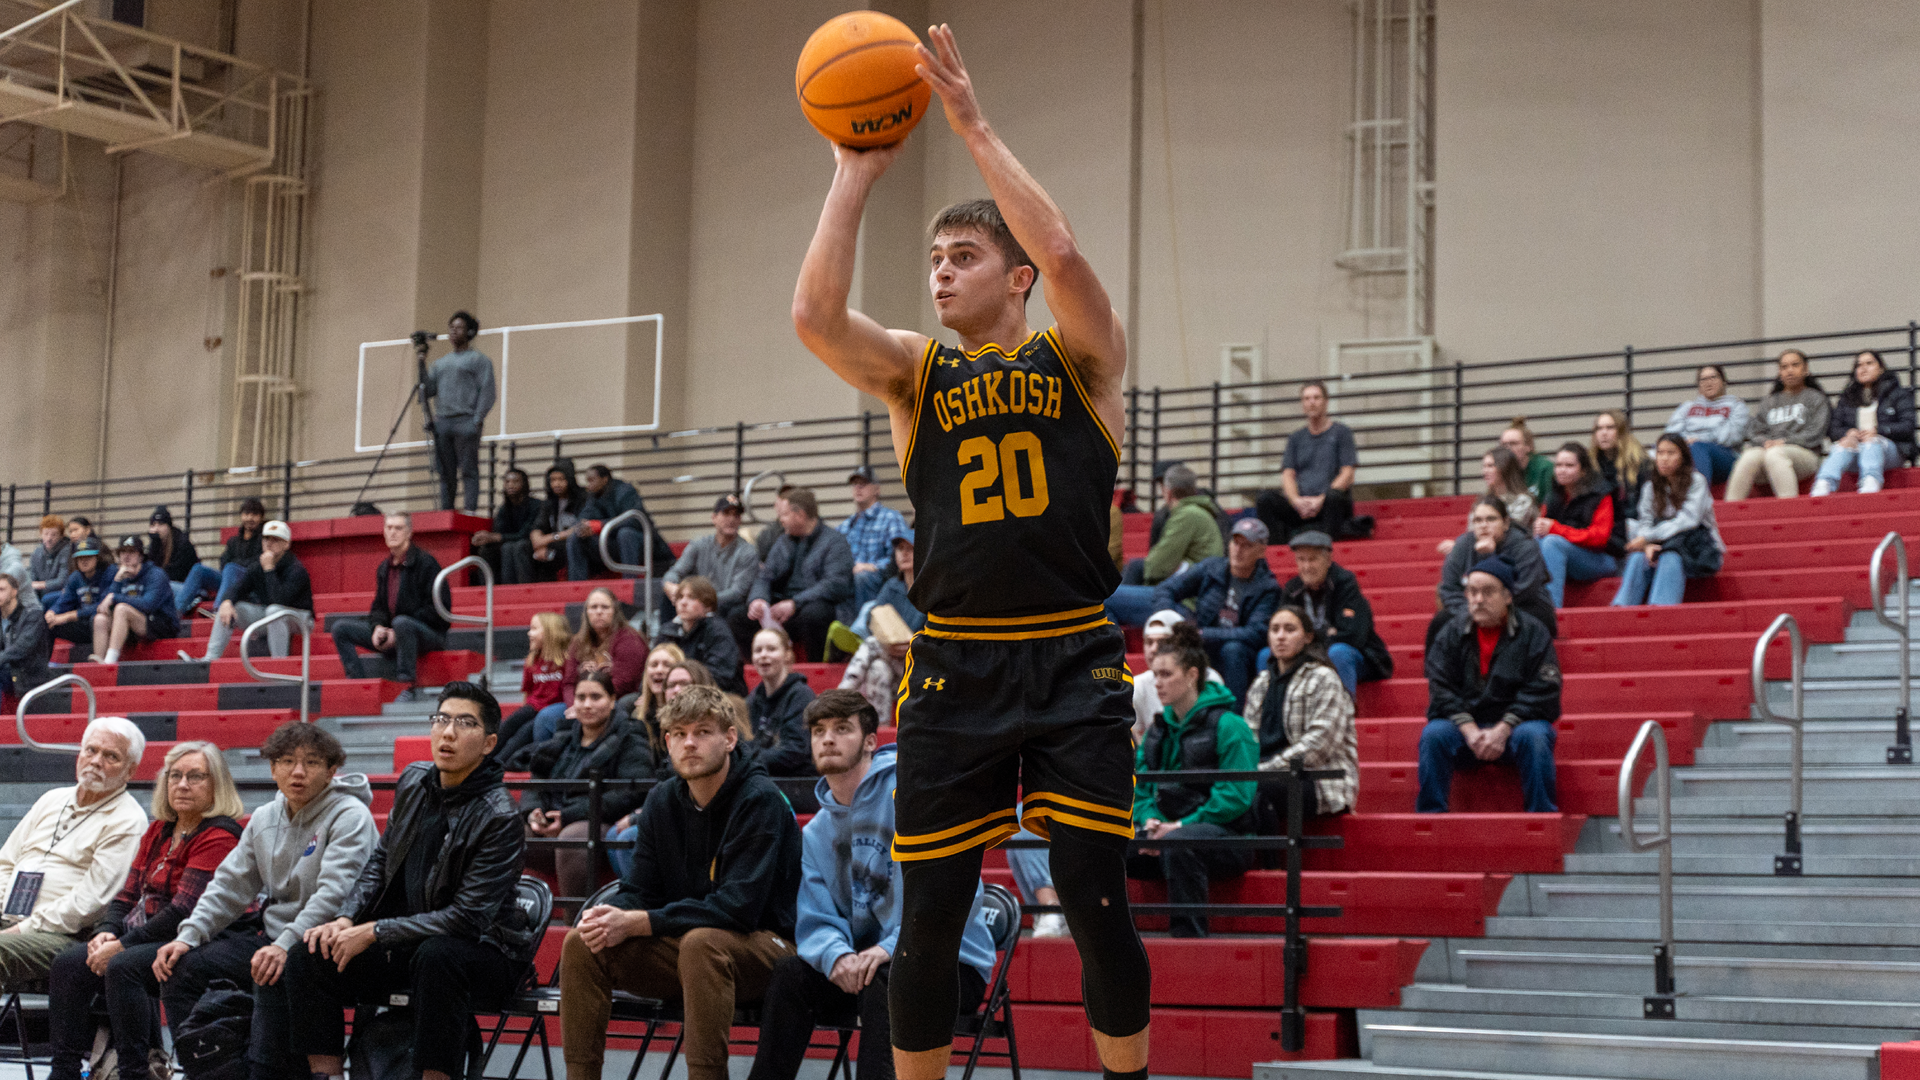 Quinn Steckbauer scored 24 points in the Titans' win over Whitworth on Thursday. Photo Credit: Whitworth University Sports Information